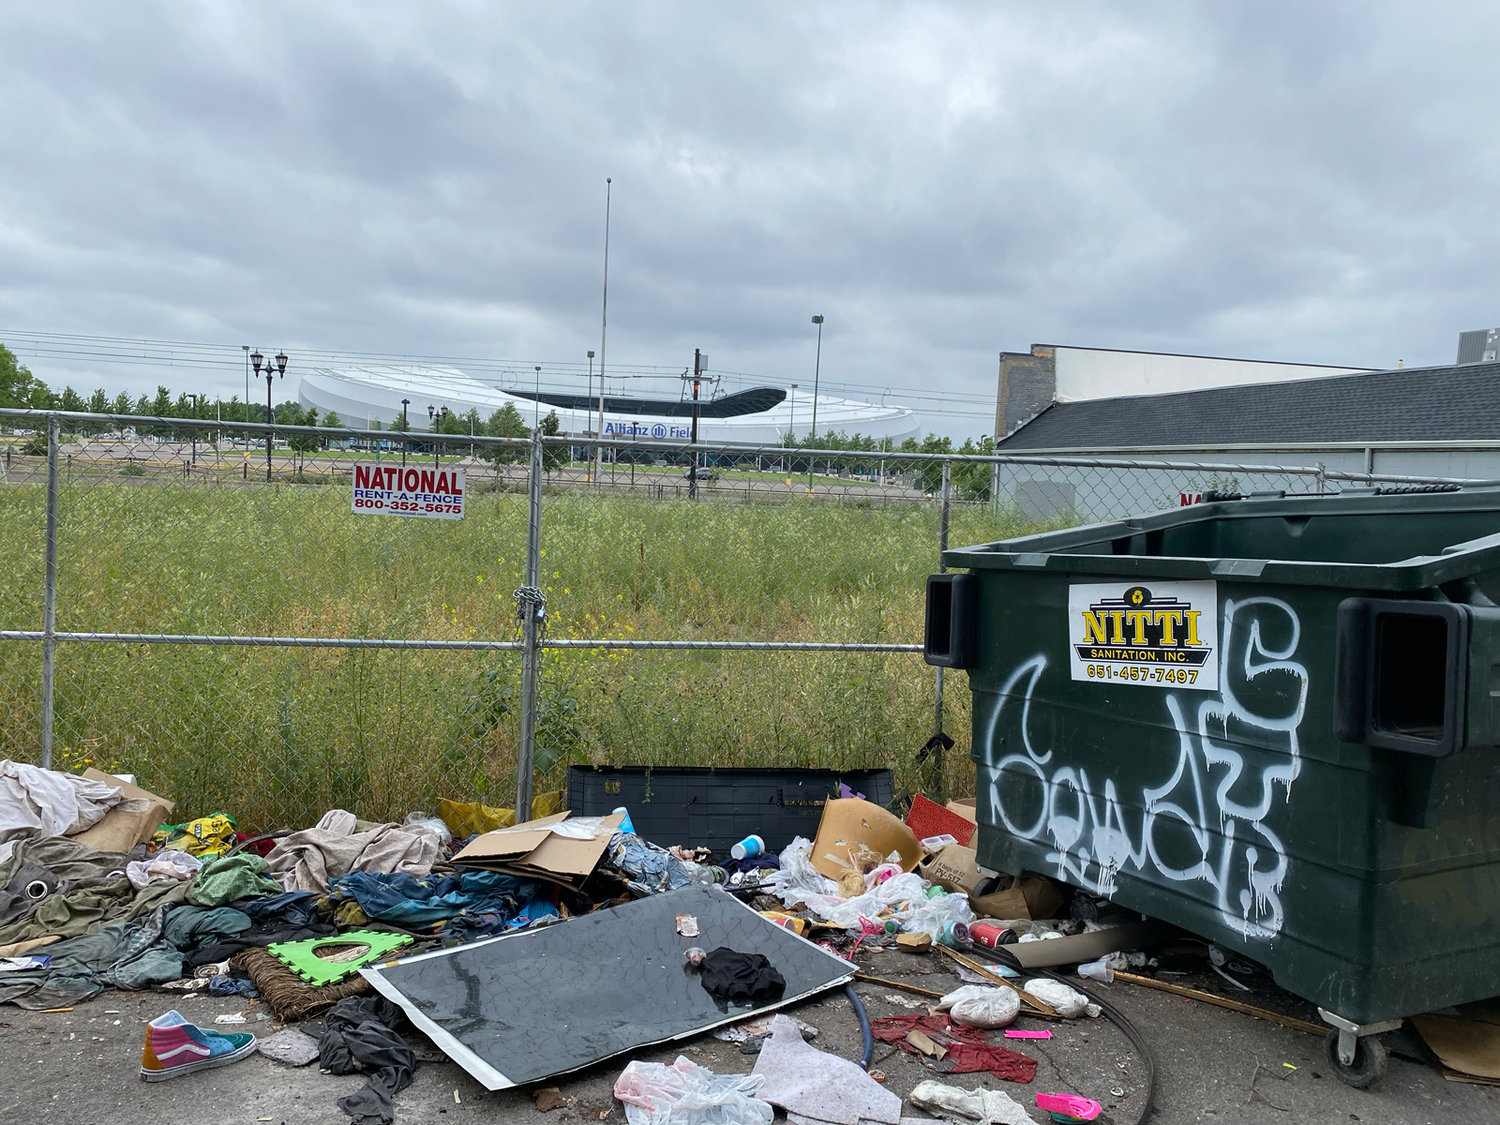 The site where DTLR Sports Dome was formerly located also remain vacant and covered by grass in July 2022. (Photo by Tesha M. Christensen)